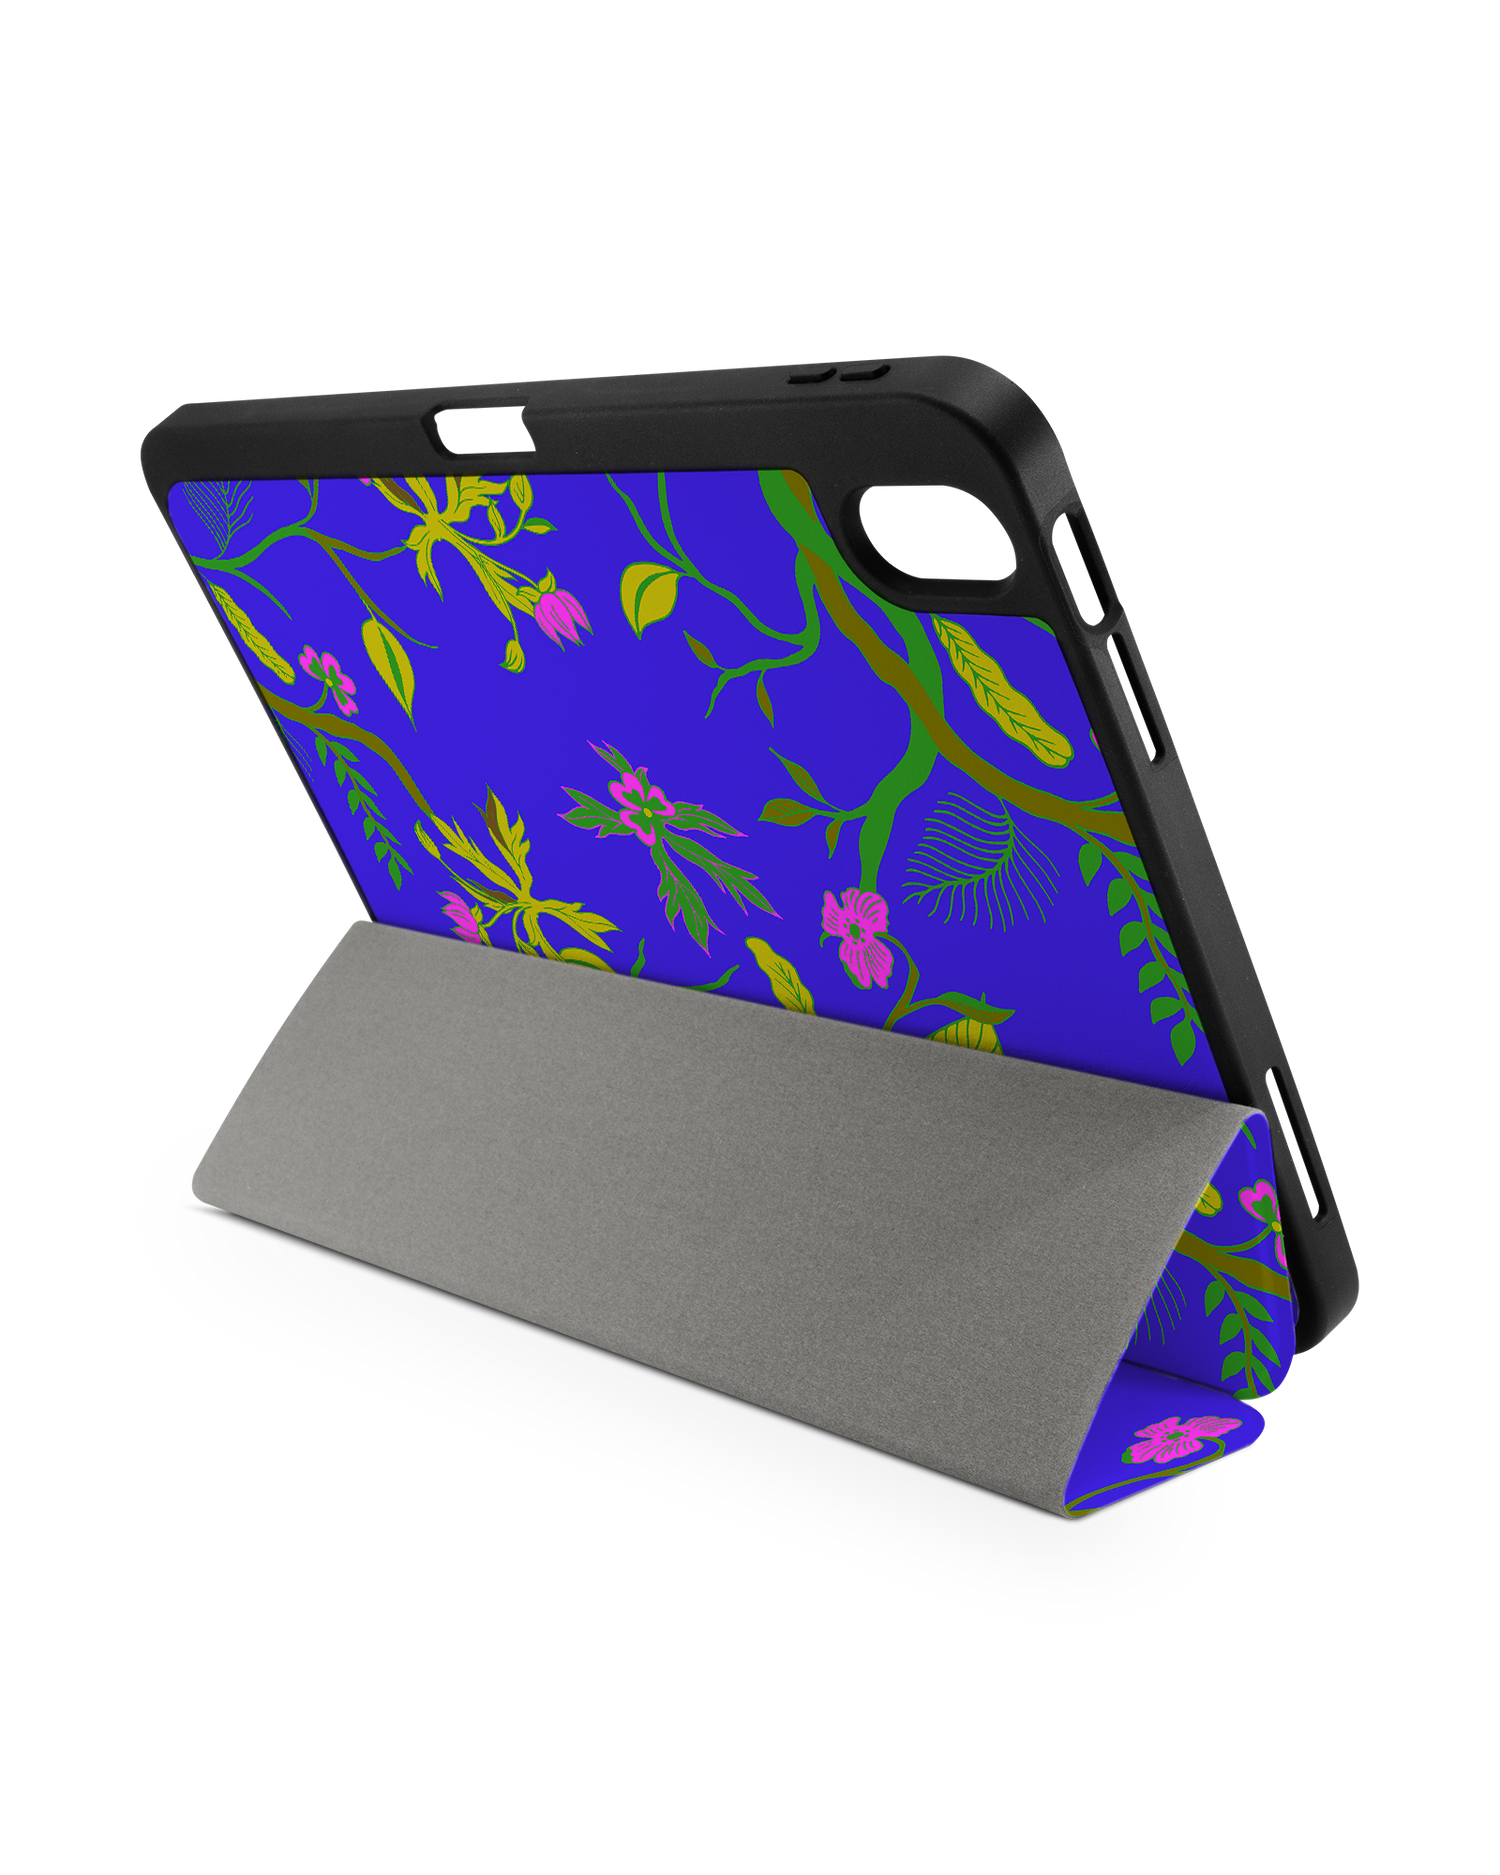 Ultra Violet Floral iPad Case with Pencil Holder for Apple iPad (10th Generation): Set up in landscape format (back view)